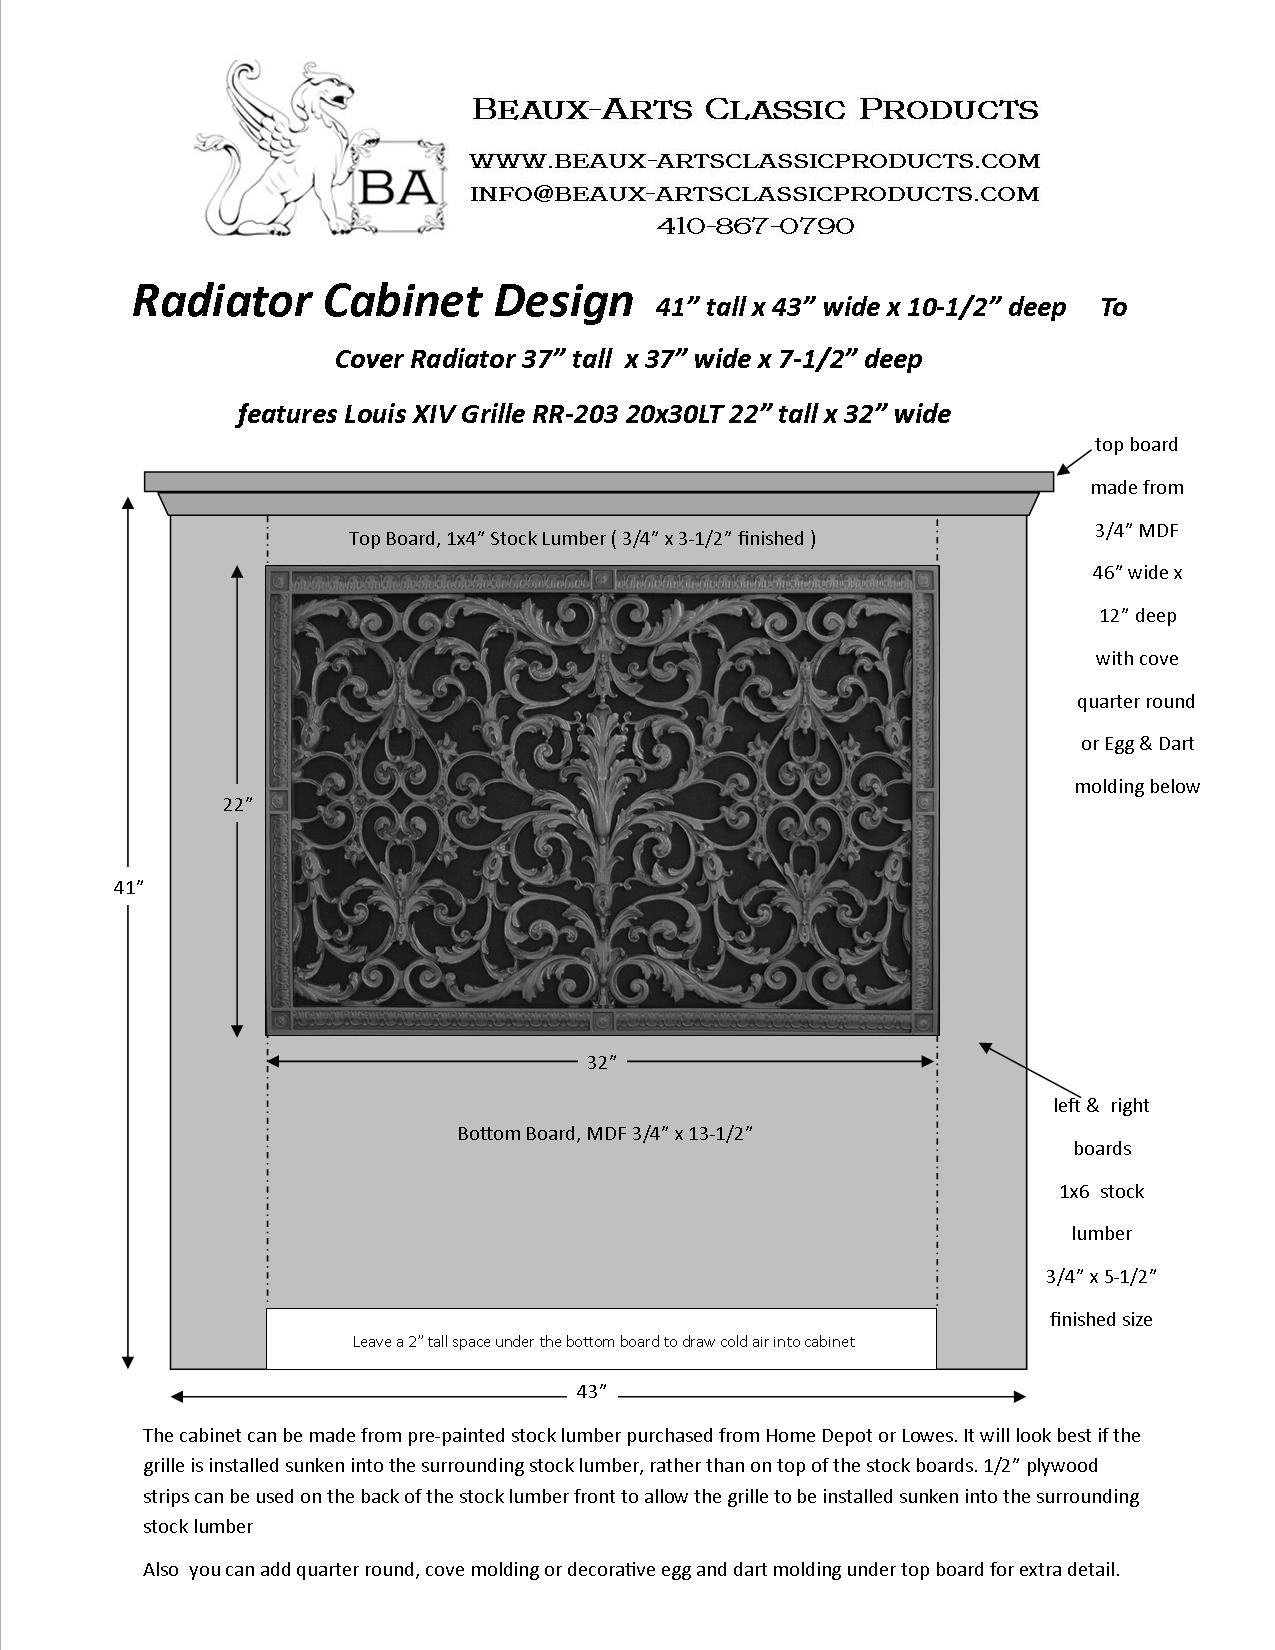 Radiator Cover Design with a 20x30 radiator cover grille